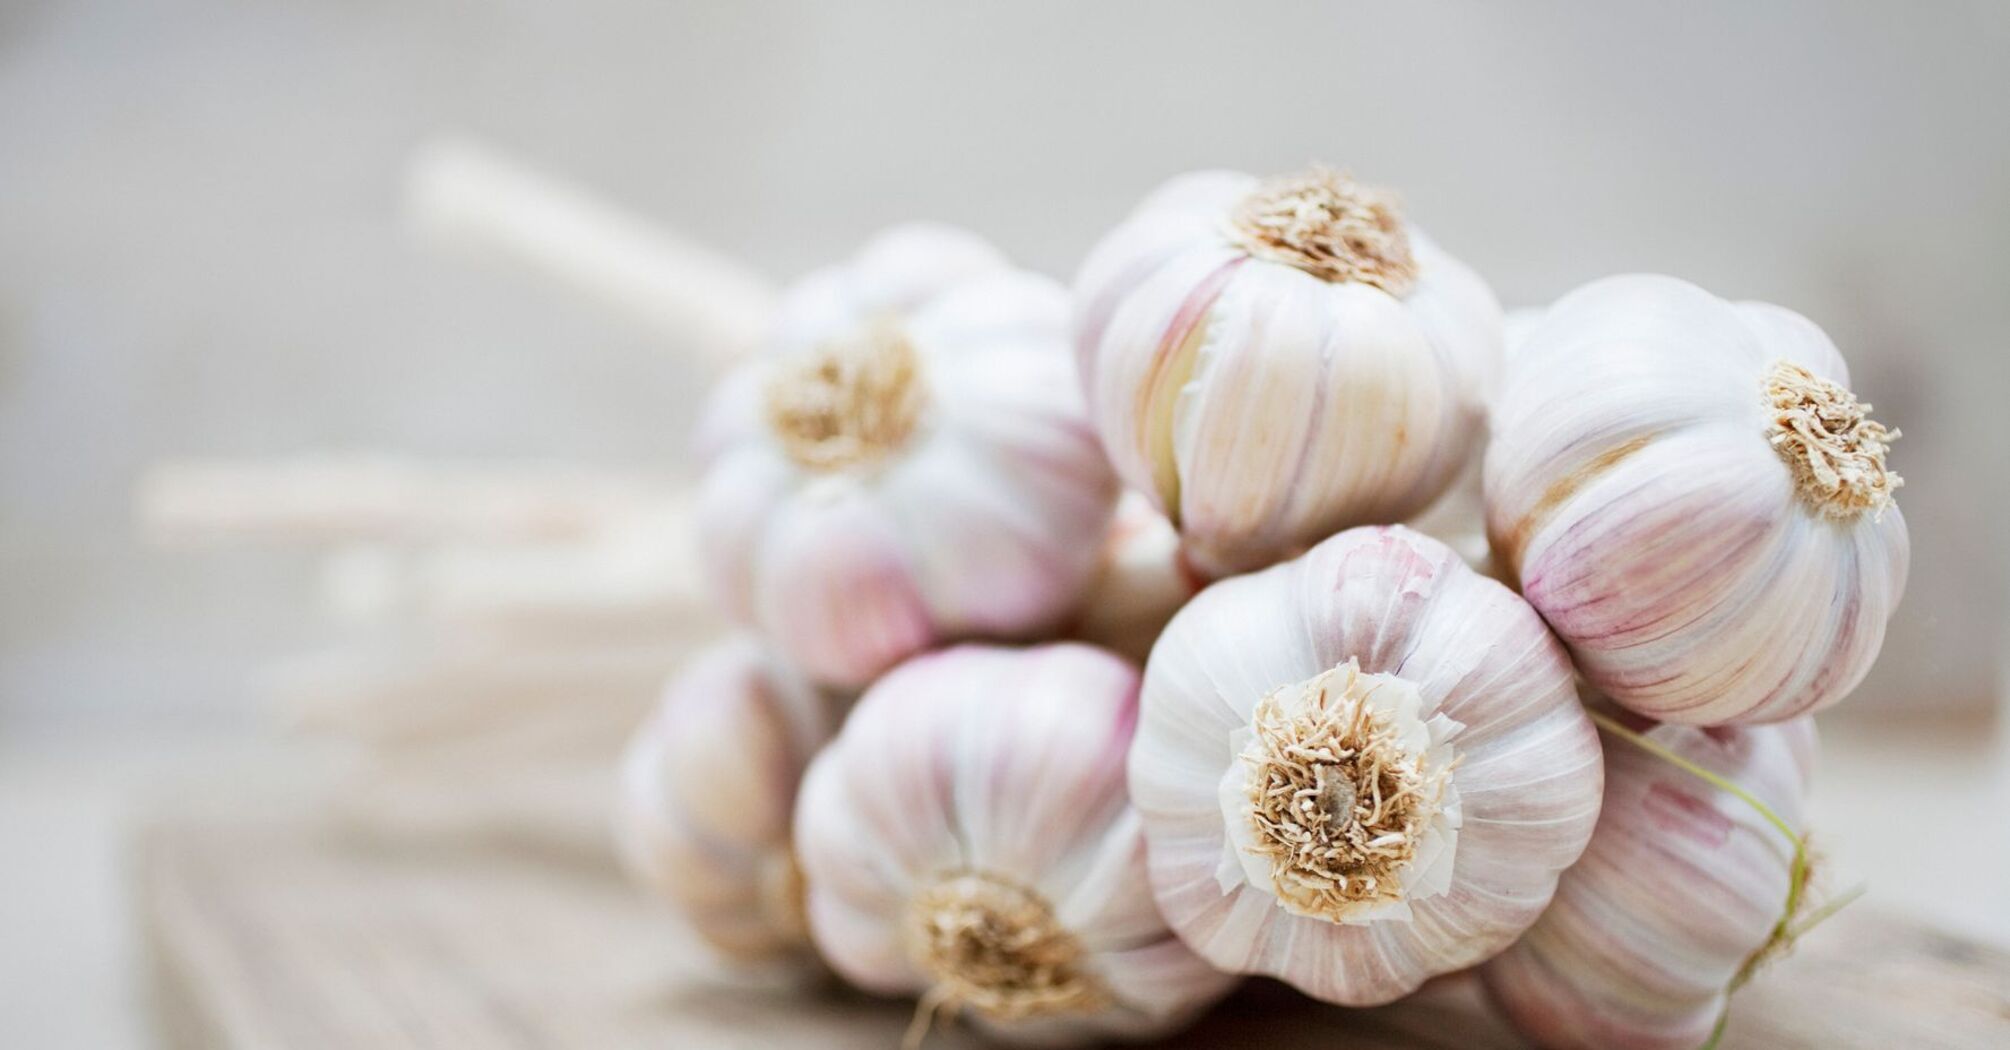 How to remove garlic odor from the mouth